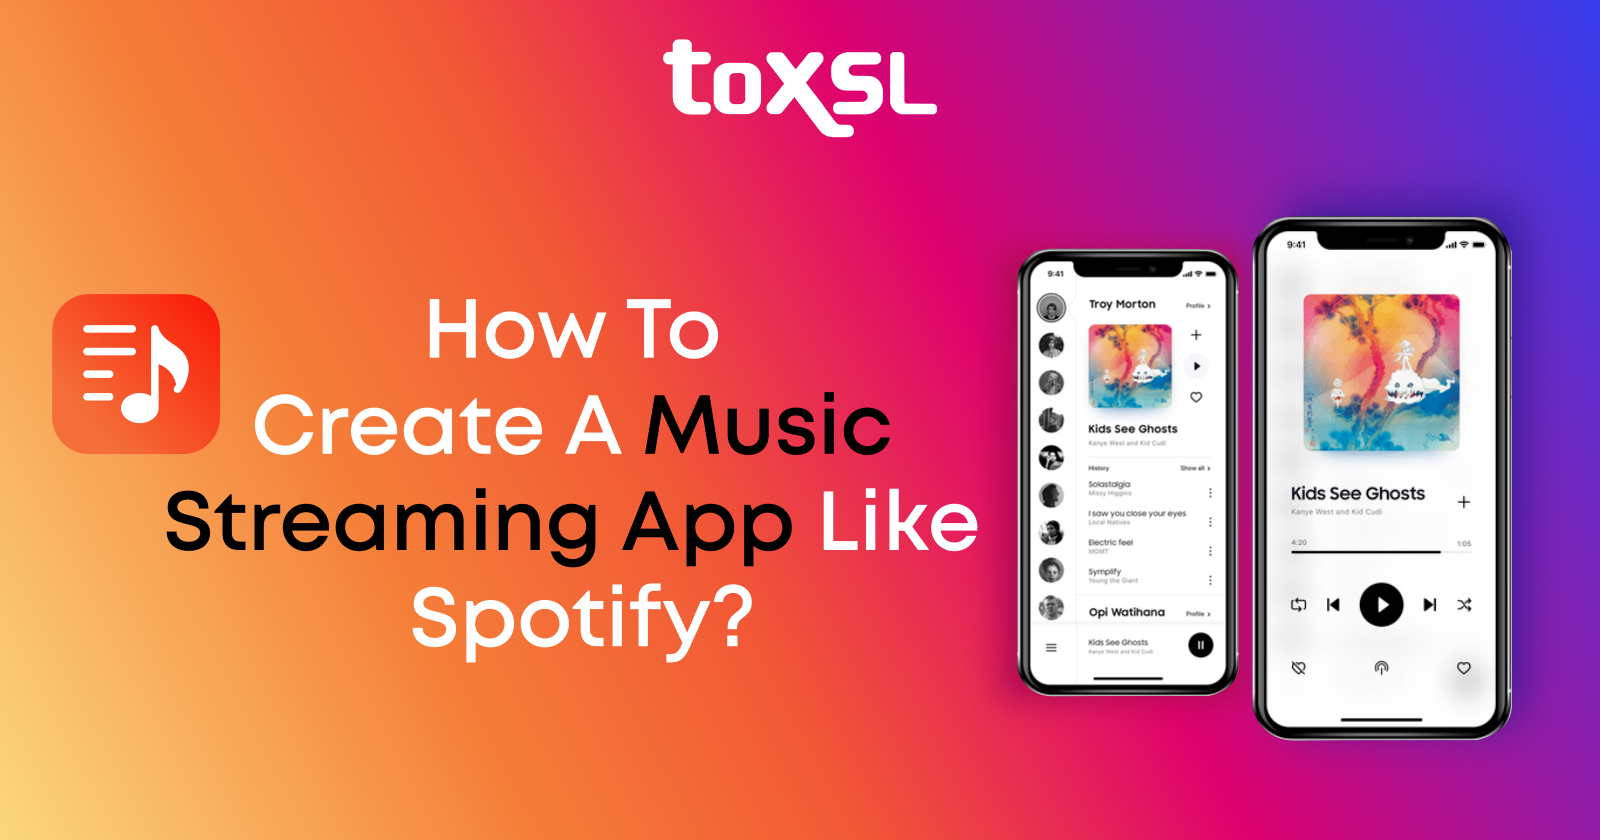 How To Create A Music Streaming App Like Spotify?